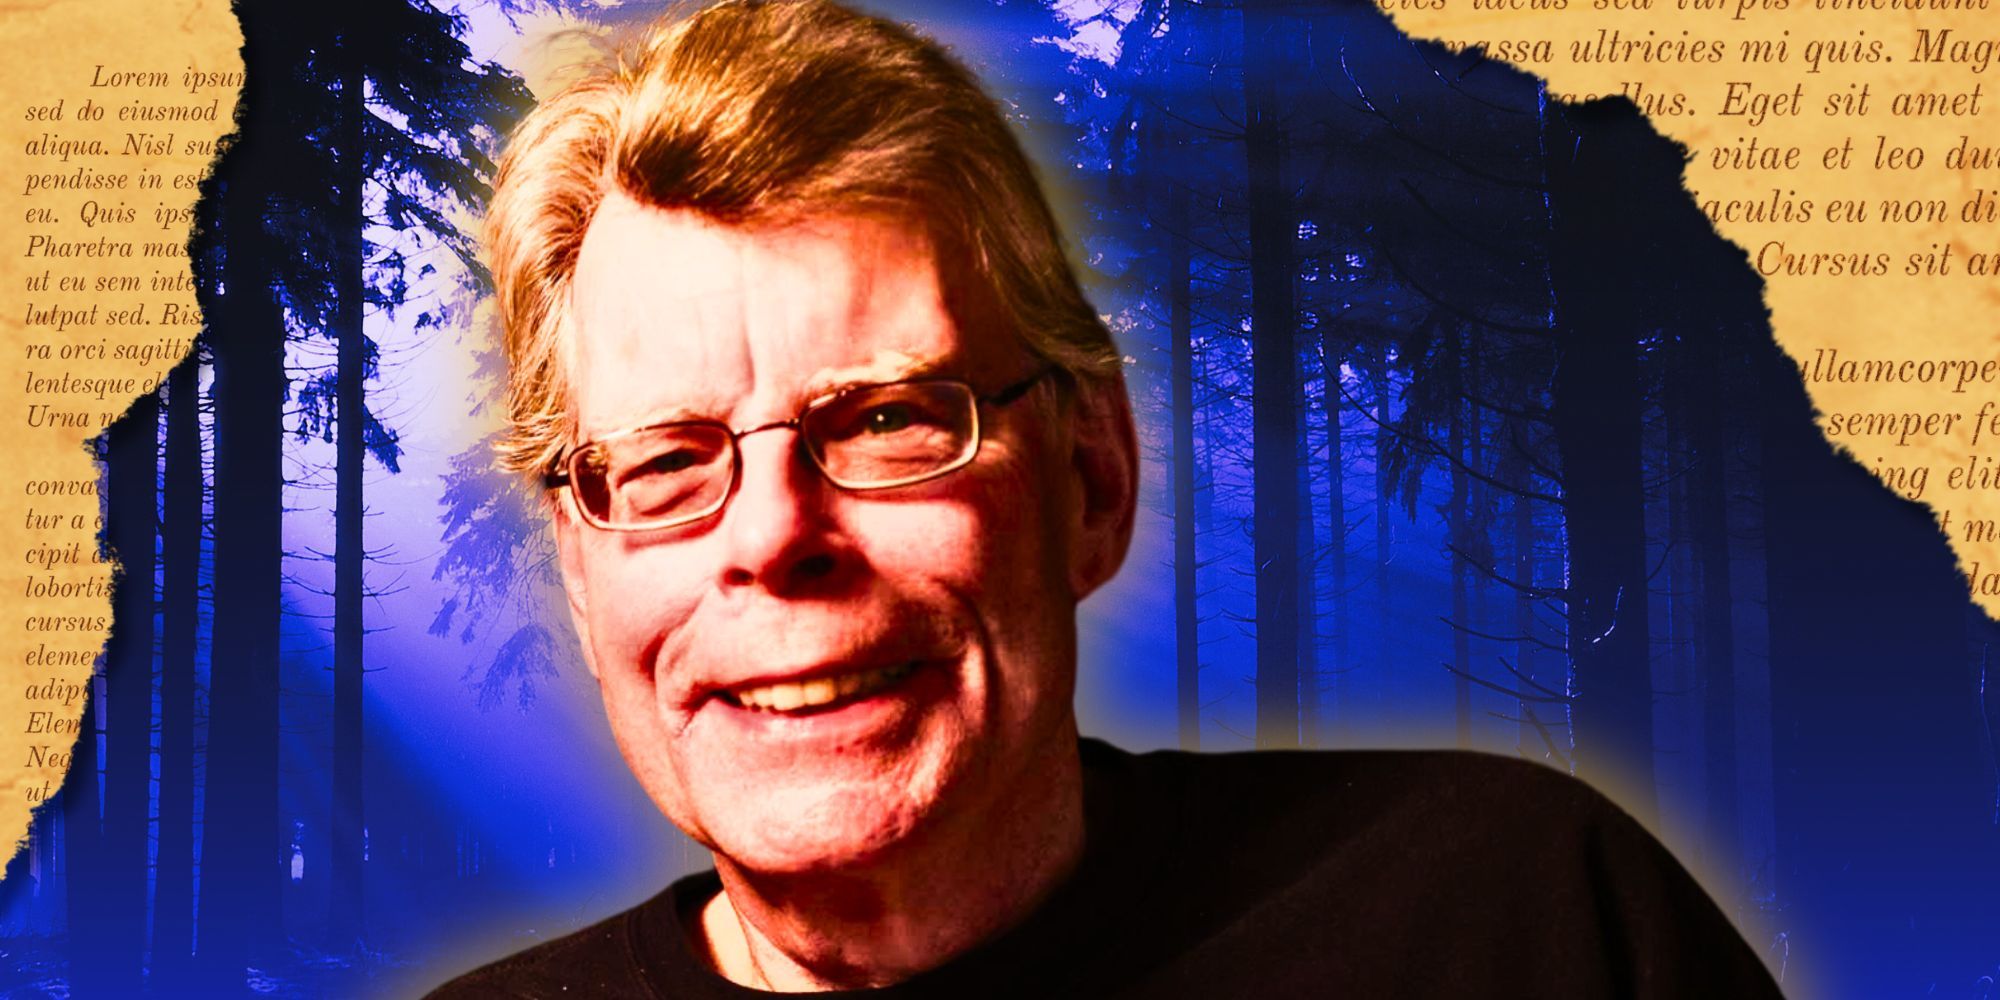 Stephen King with a background of book pages and a dark blue forest